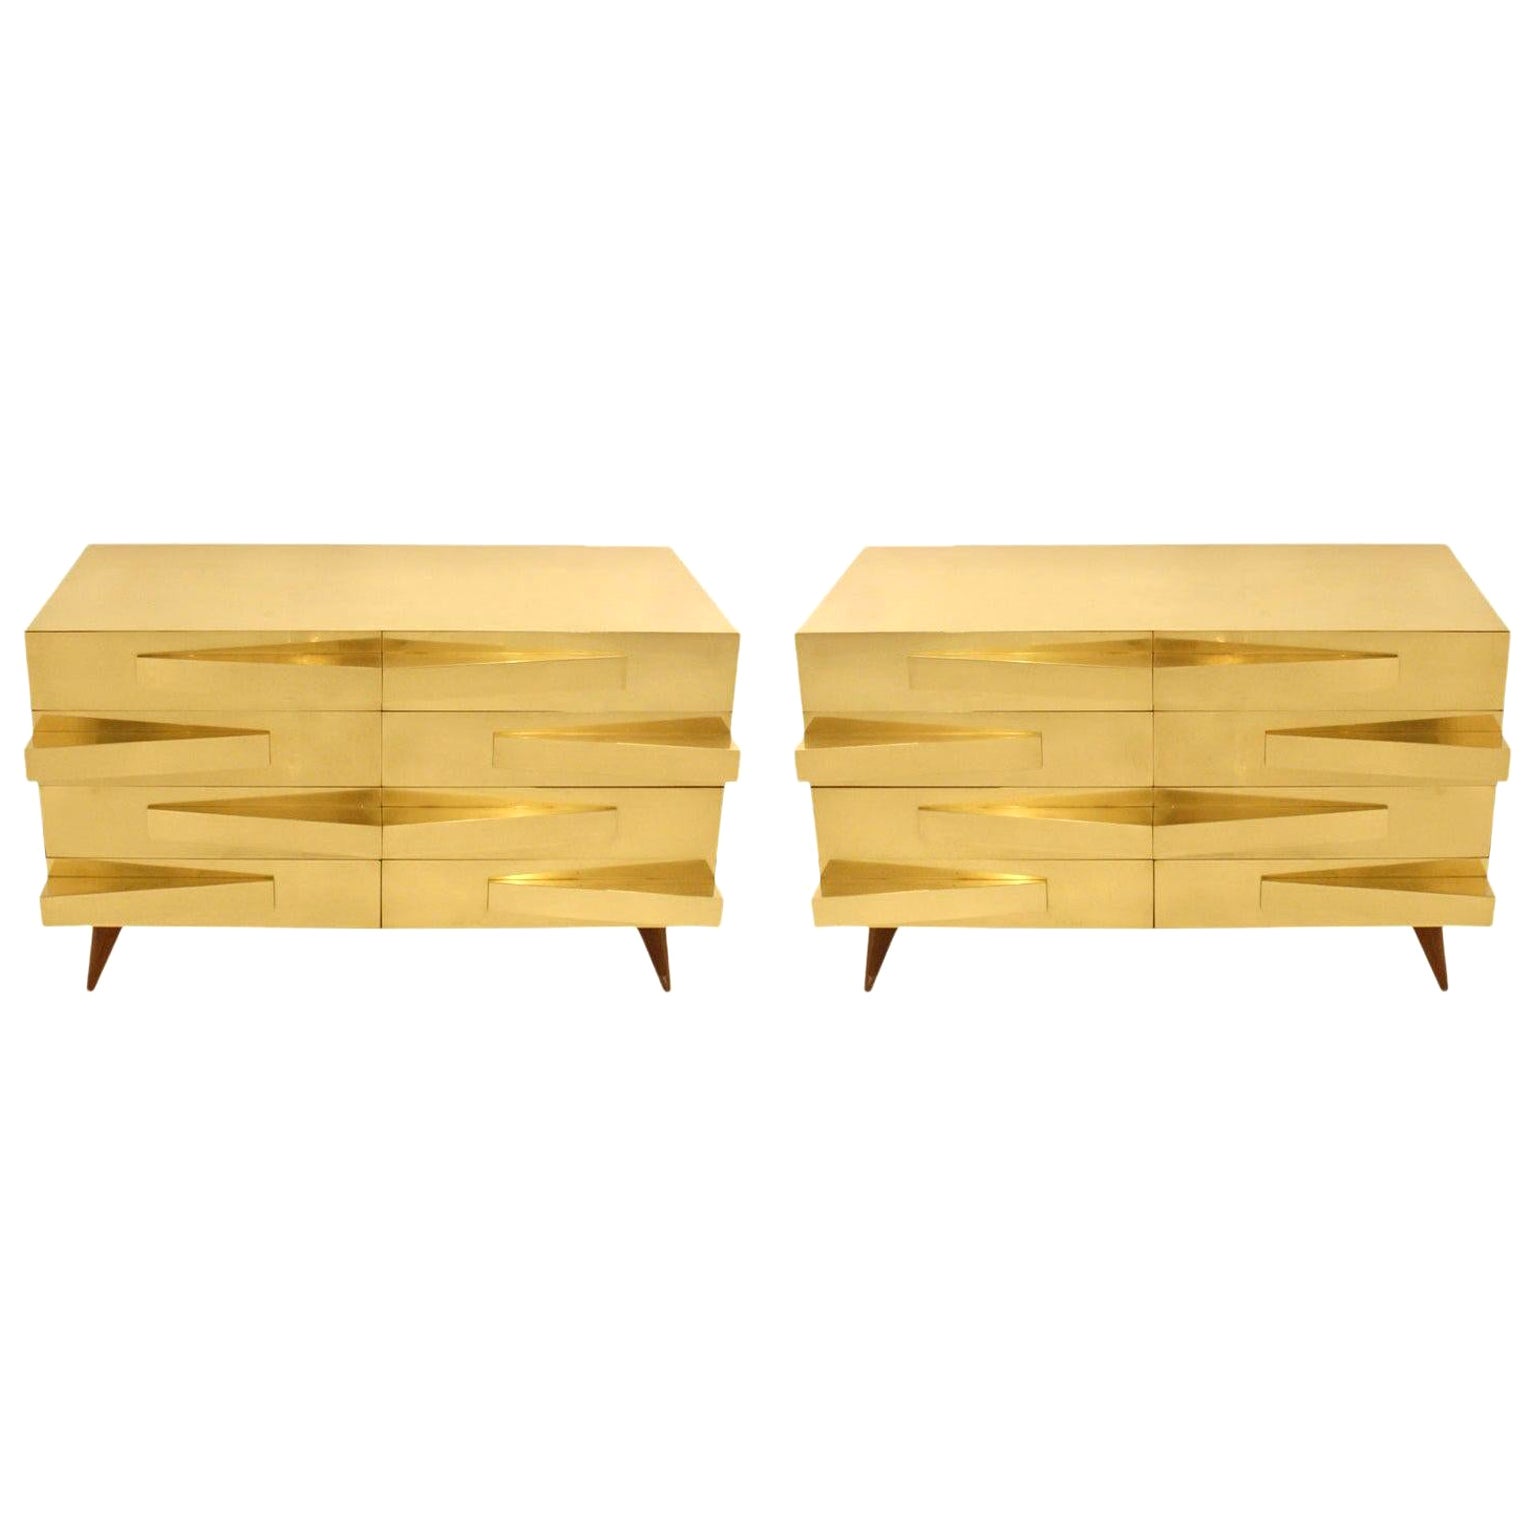 Mid-Century Modern Style Wood and Brass Italian Pair of Commodes